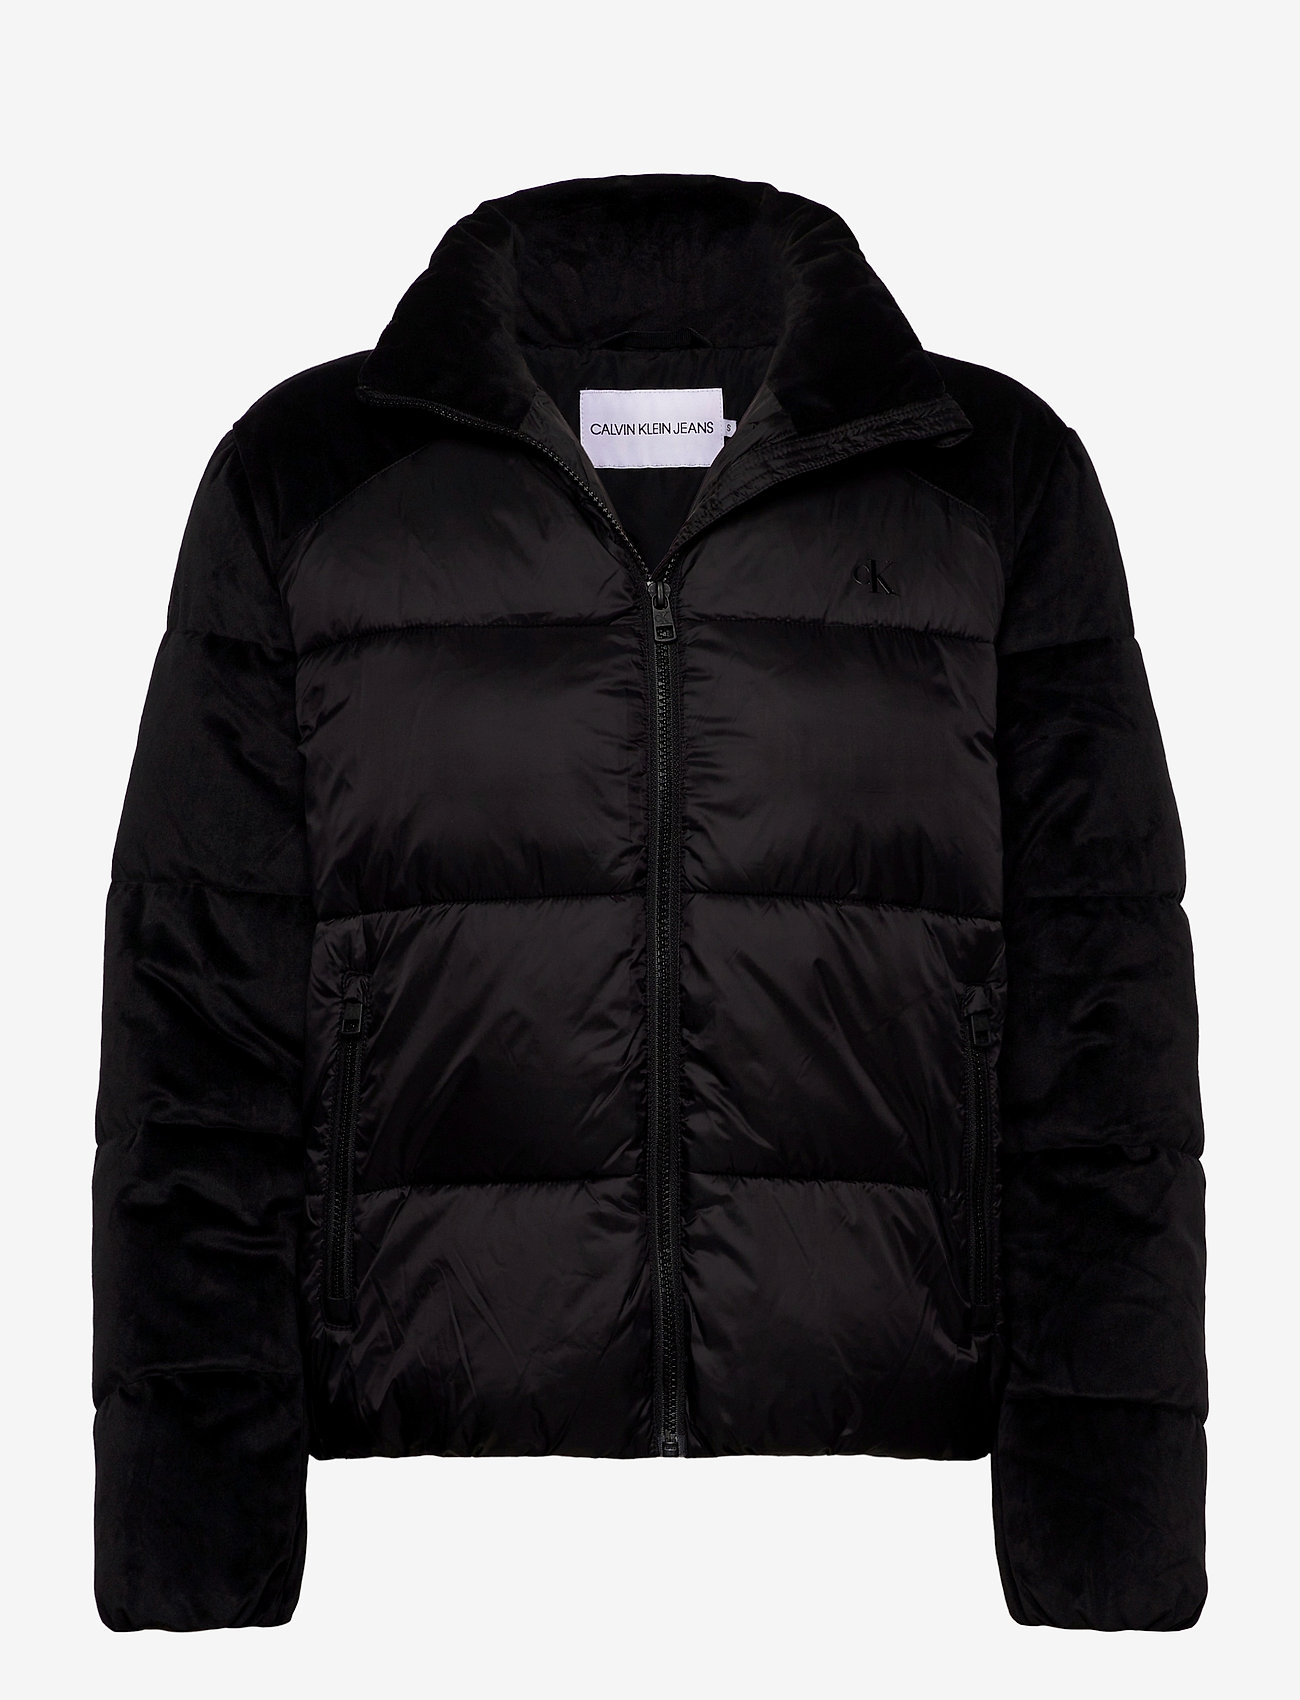 Calvin Klein Mixed Media Puffer Jacket Top Sellers, 54% OFF | www 